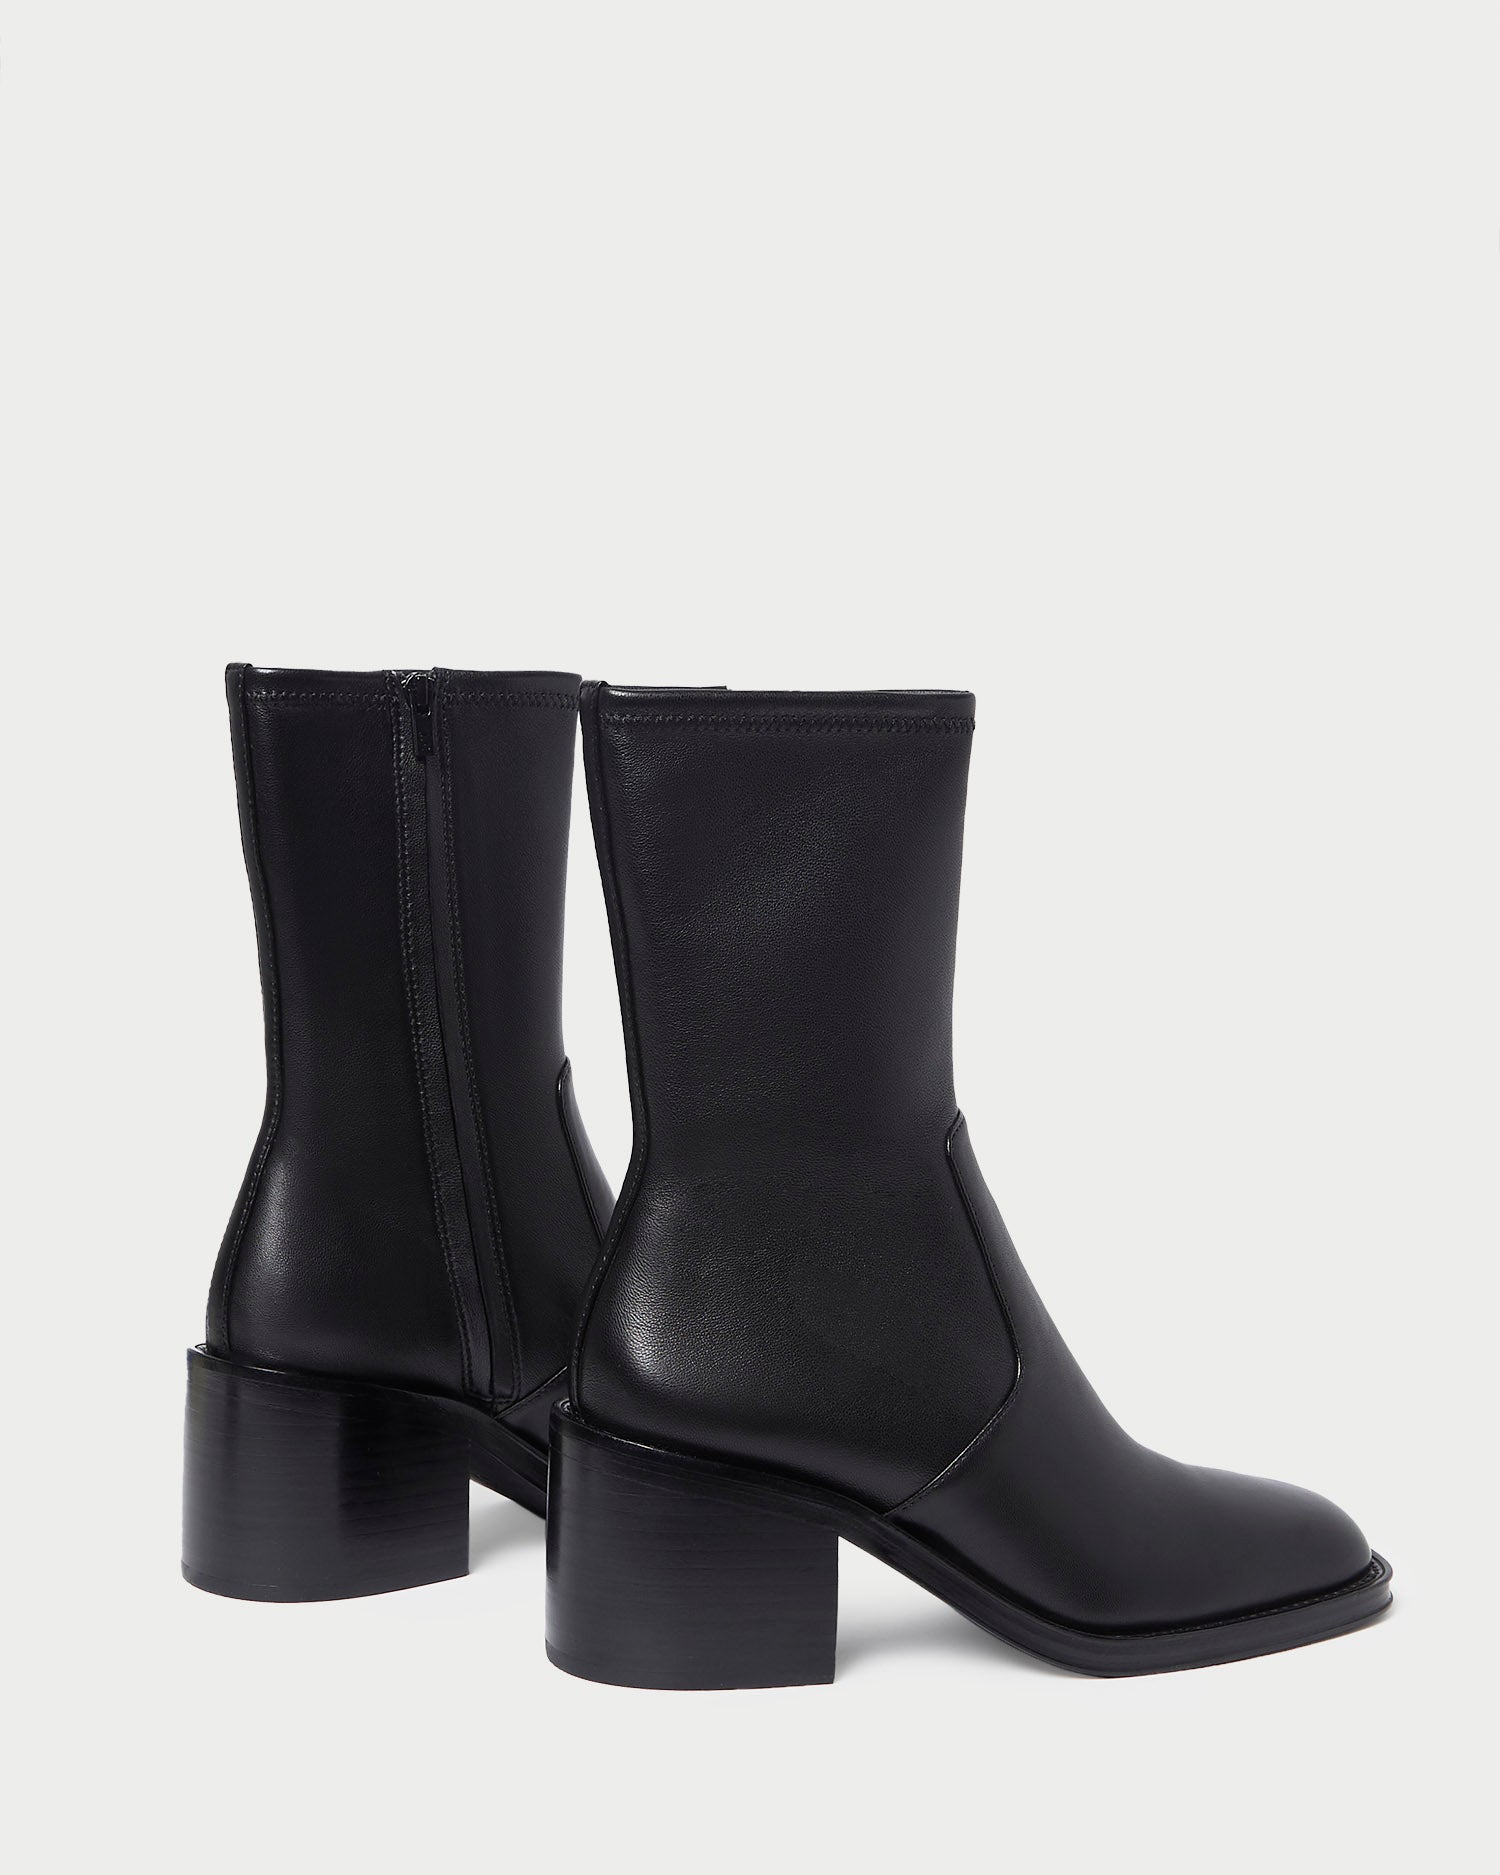 Acne Studios - Heeled ankle boots - Black